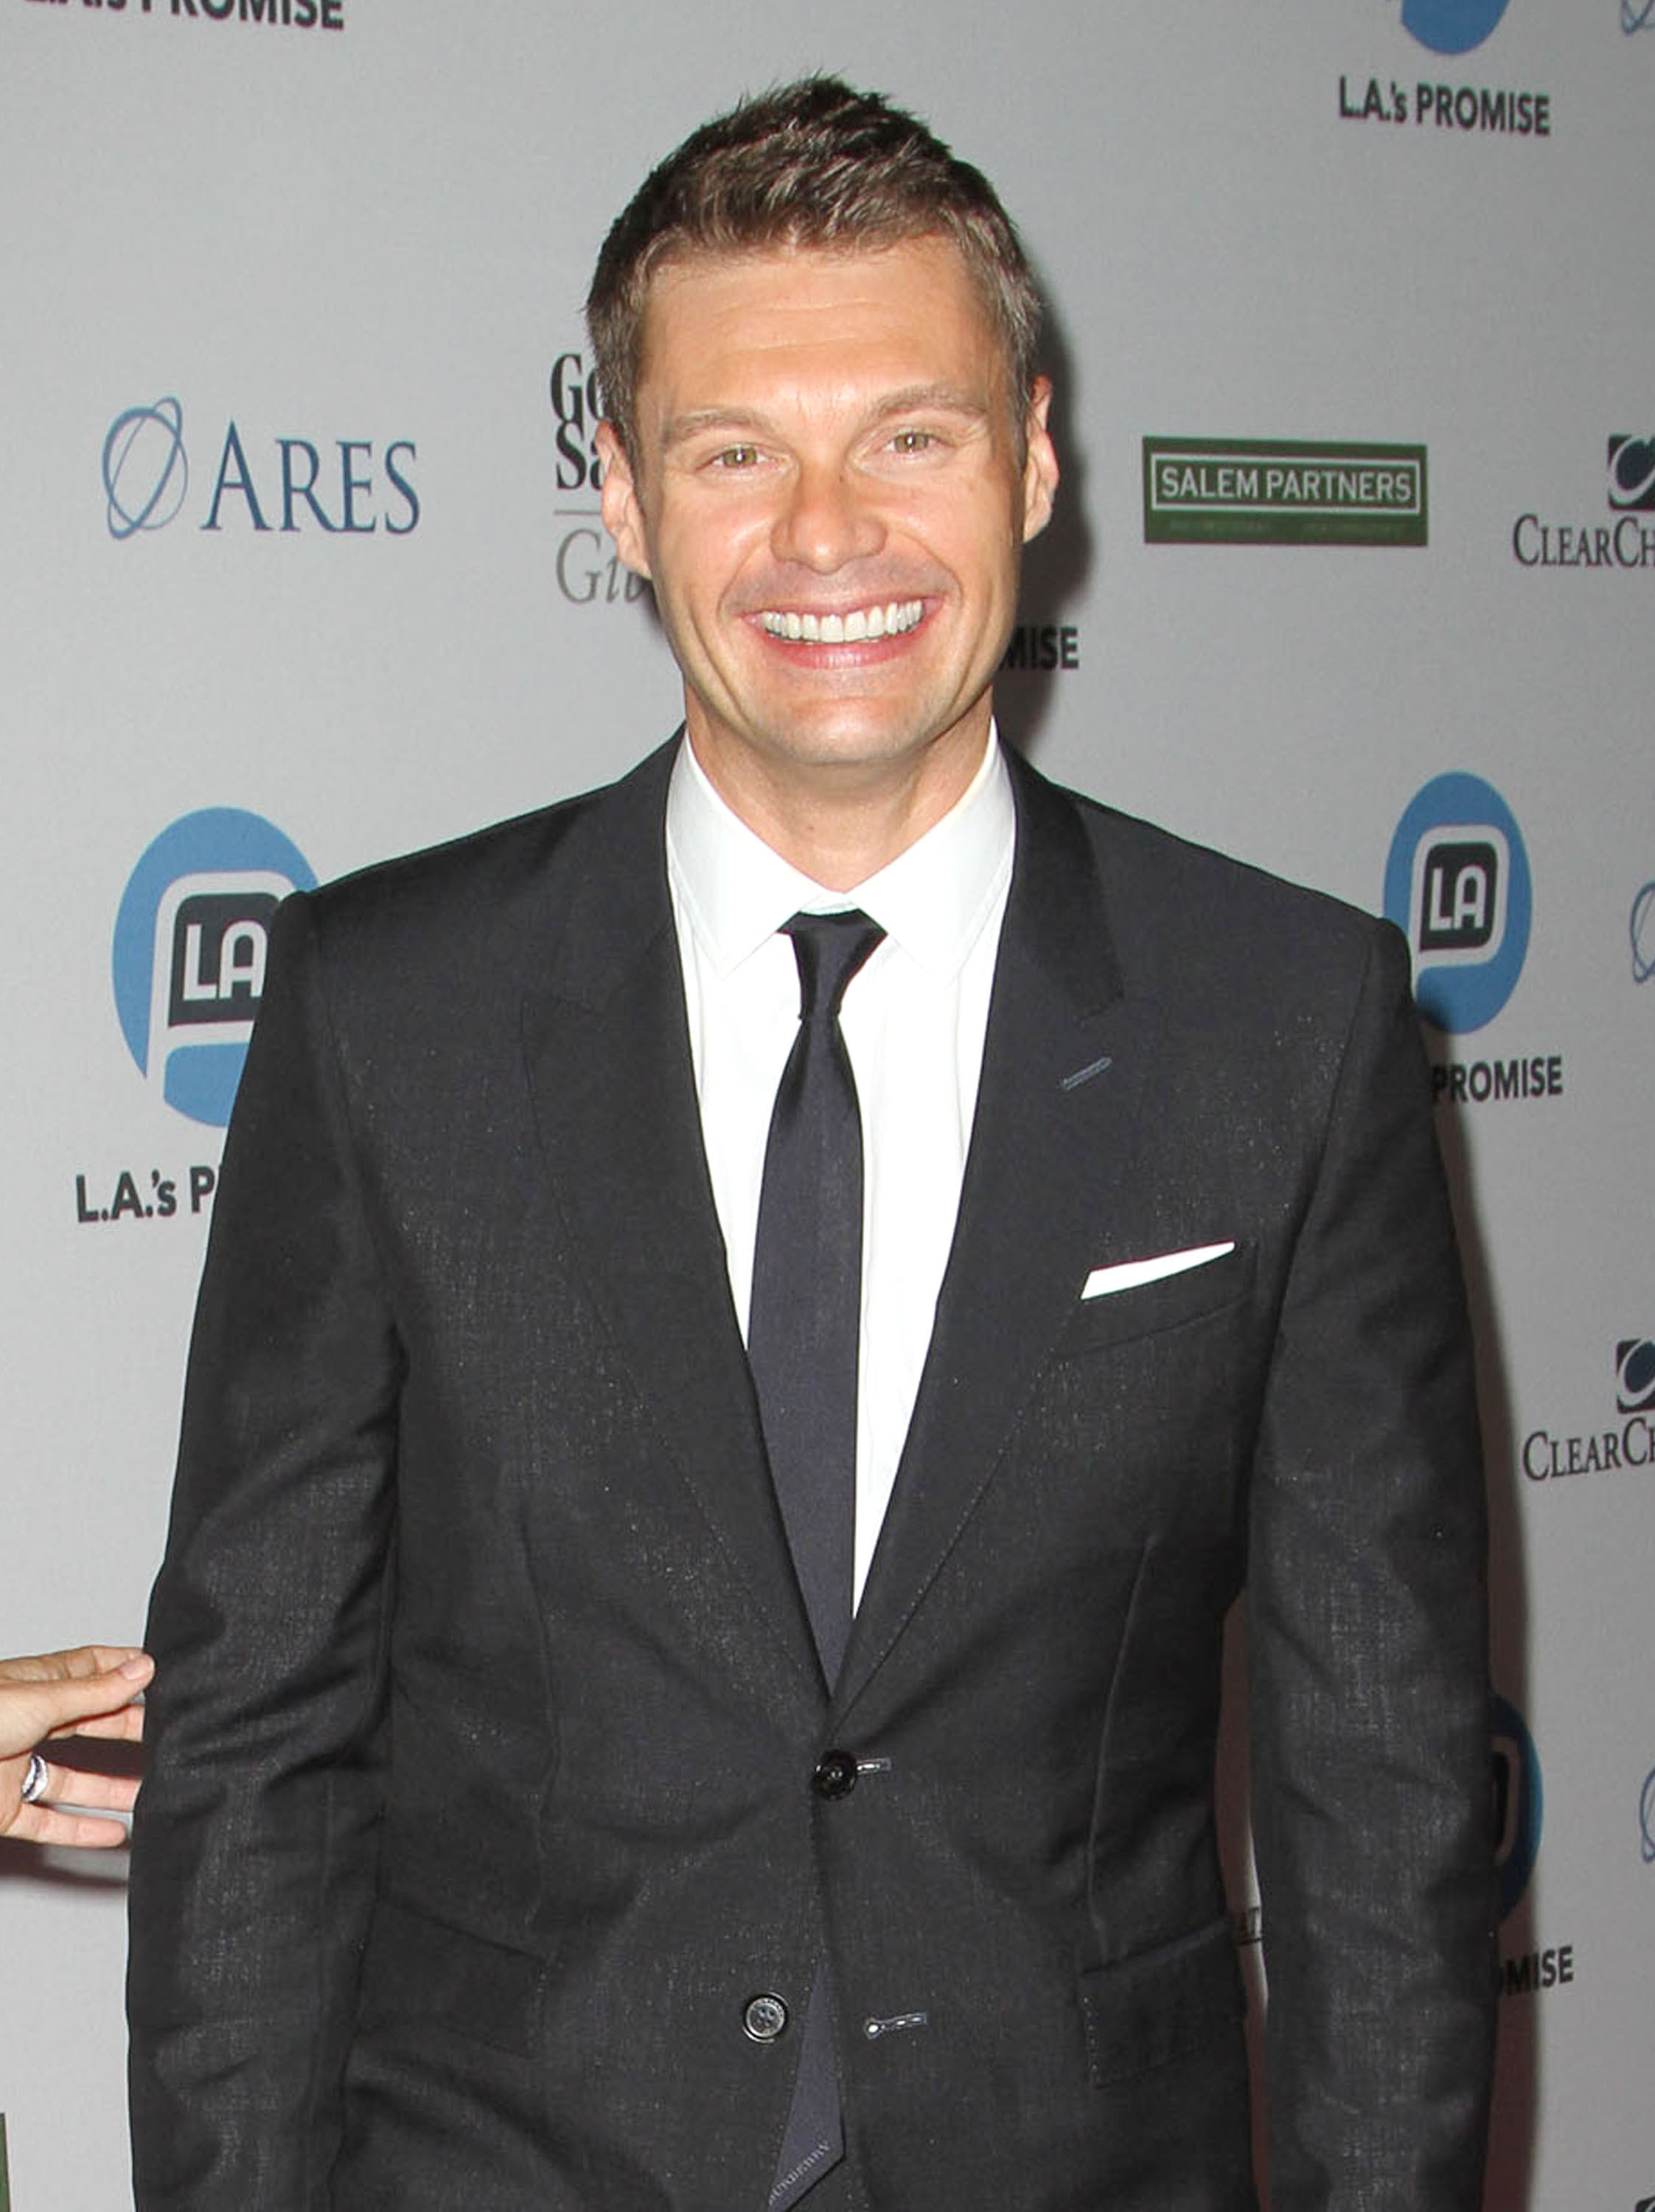 Ryan Seacrest - Promise 2011 Gala at the Grand Ballroom, Hollywood & Highland - Arrivals | Picture 88765